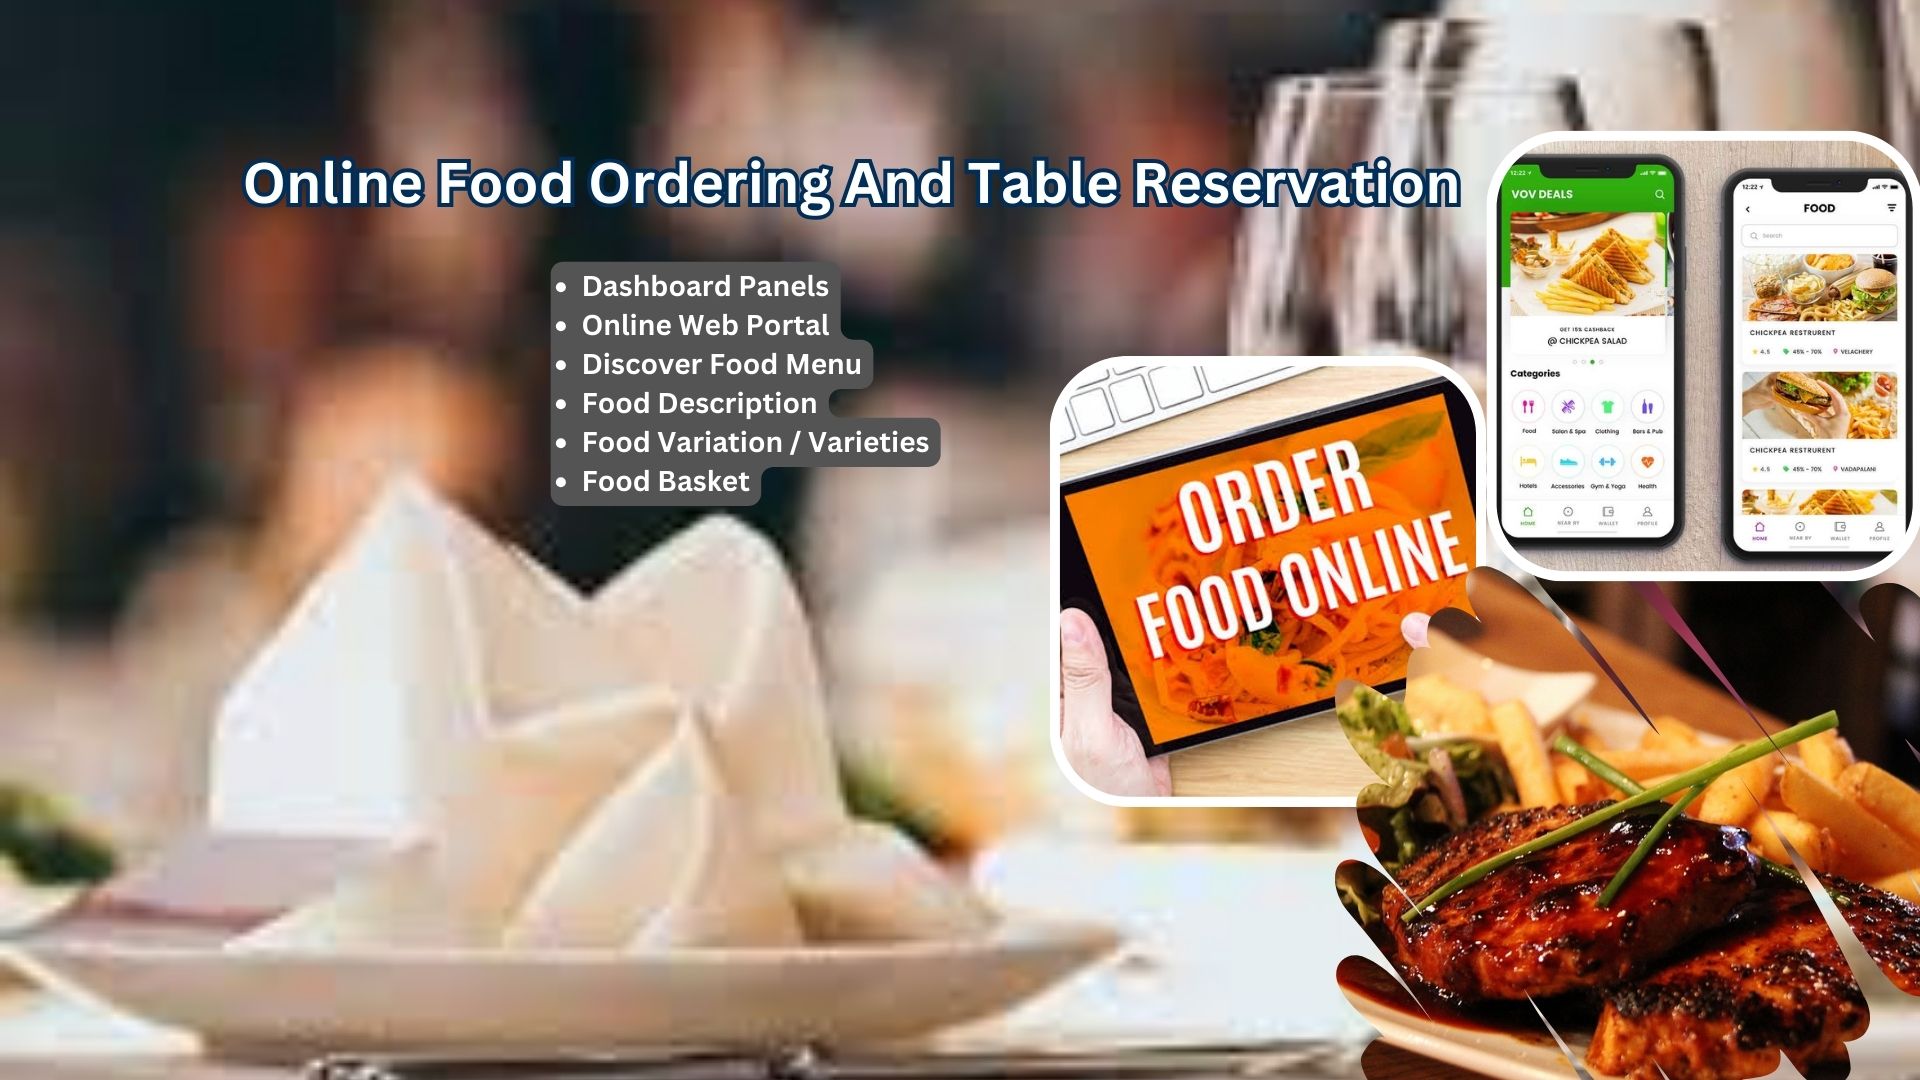 Online Food Ordering And Table Reservation